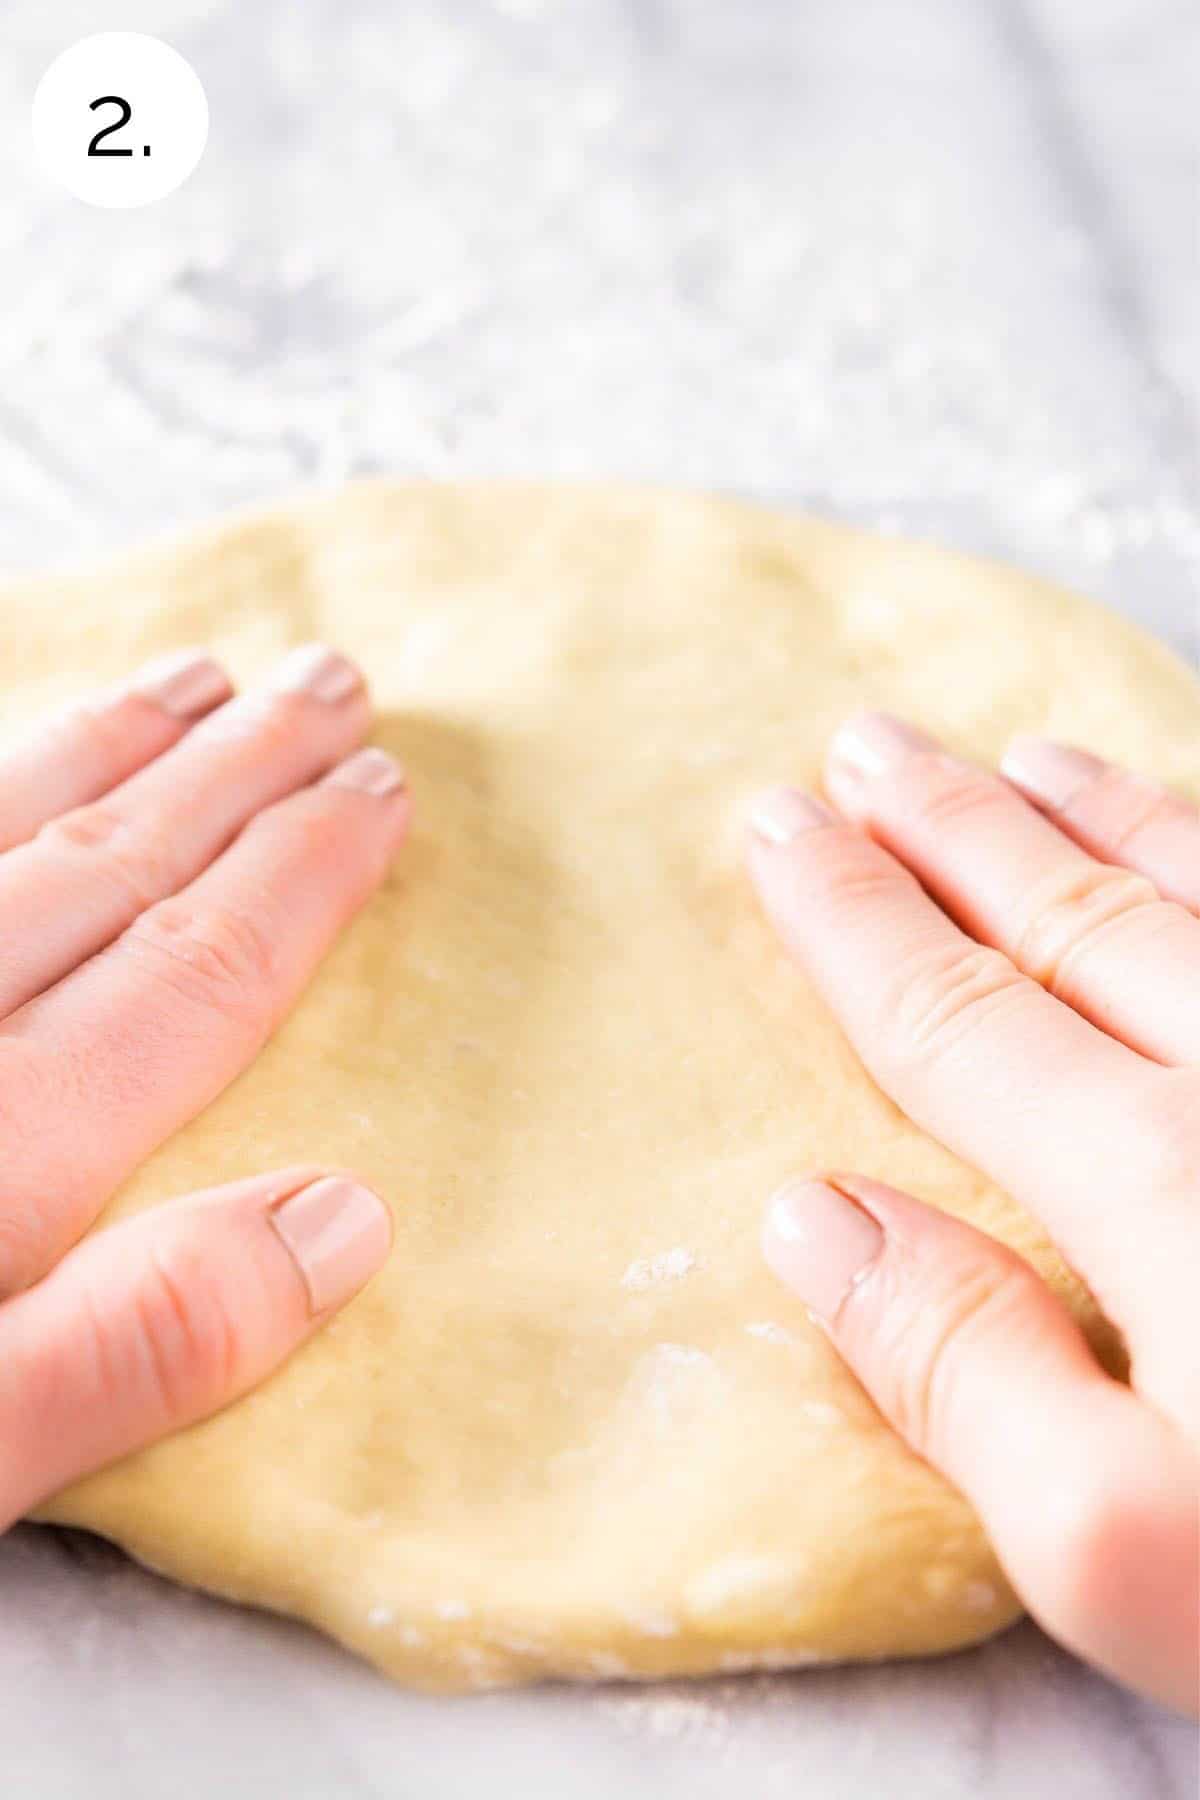 Patting the pizza dough with fingers on a countertop.